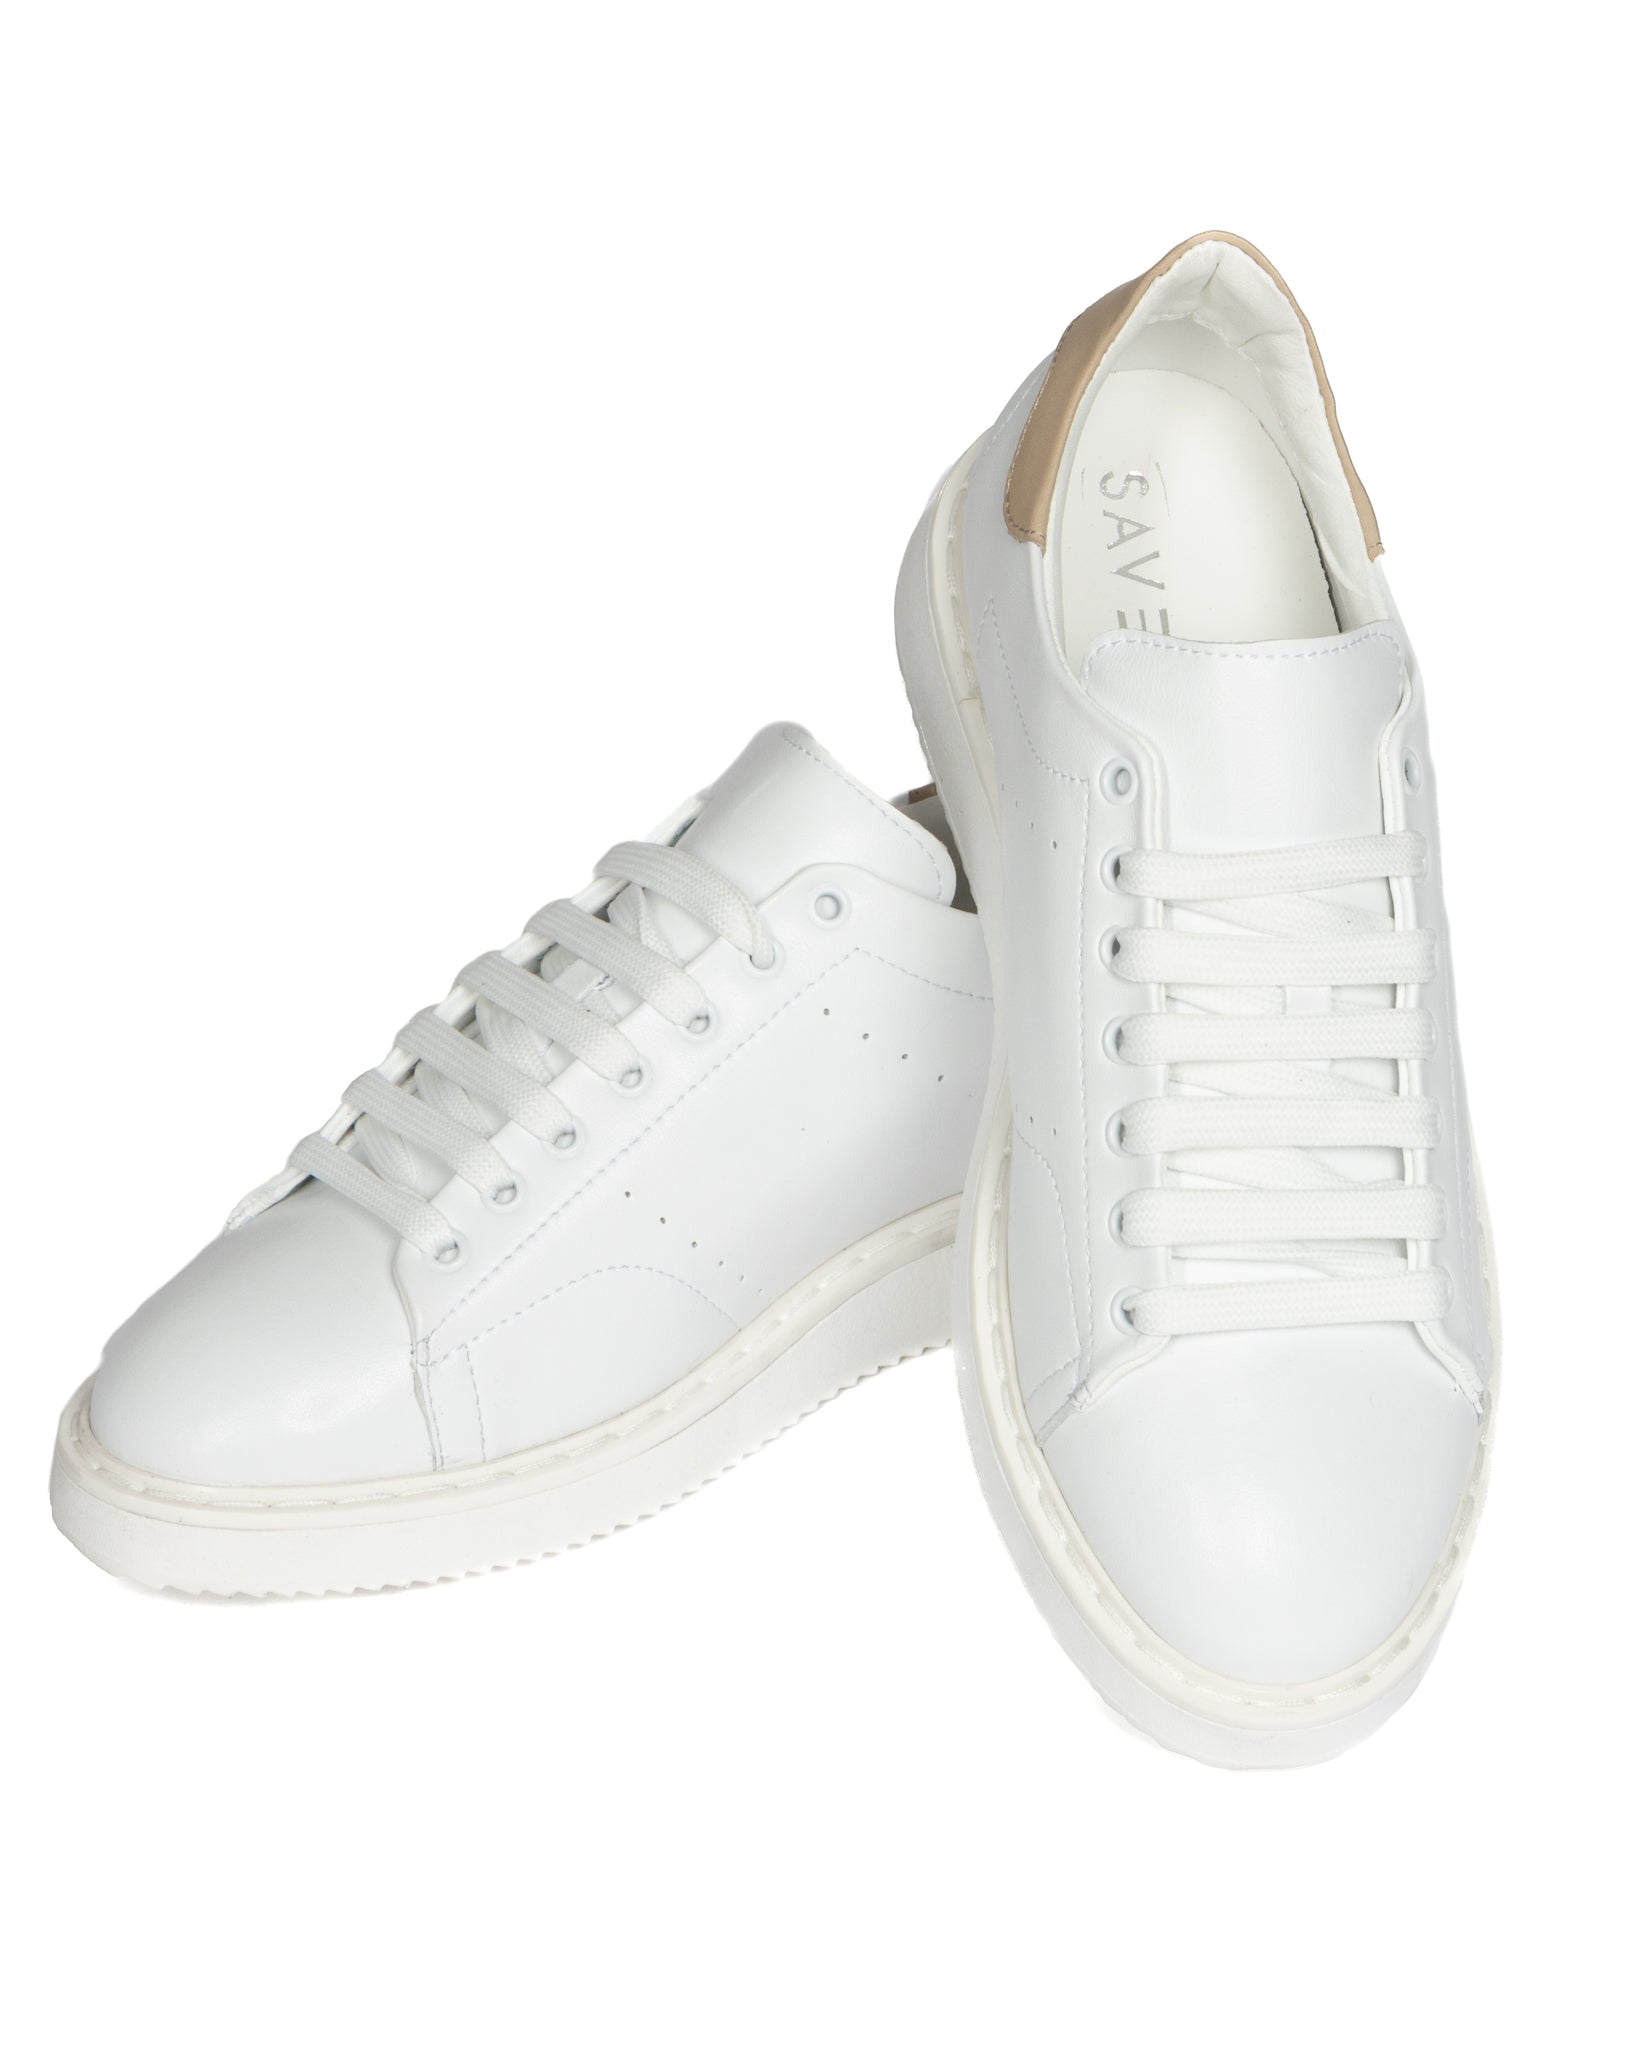 S01 - white leather sneakers with beige details